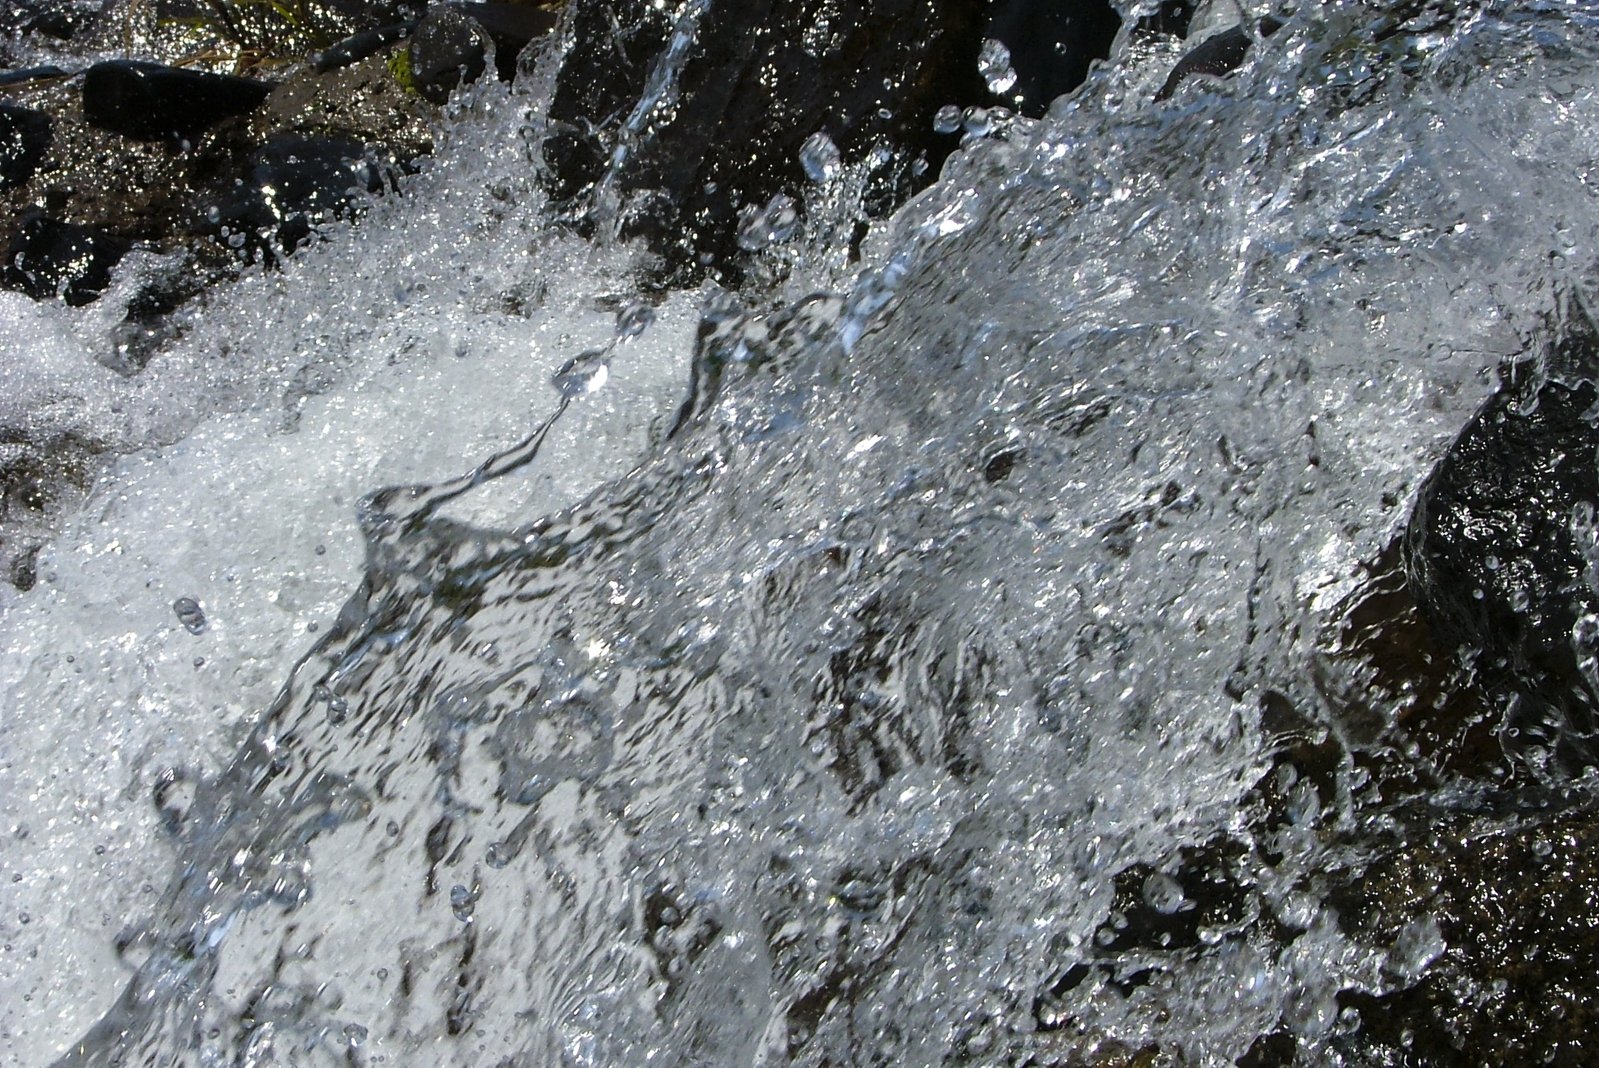 there is soing splashing out of a rushing water